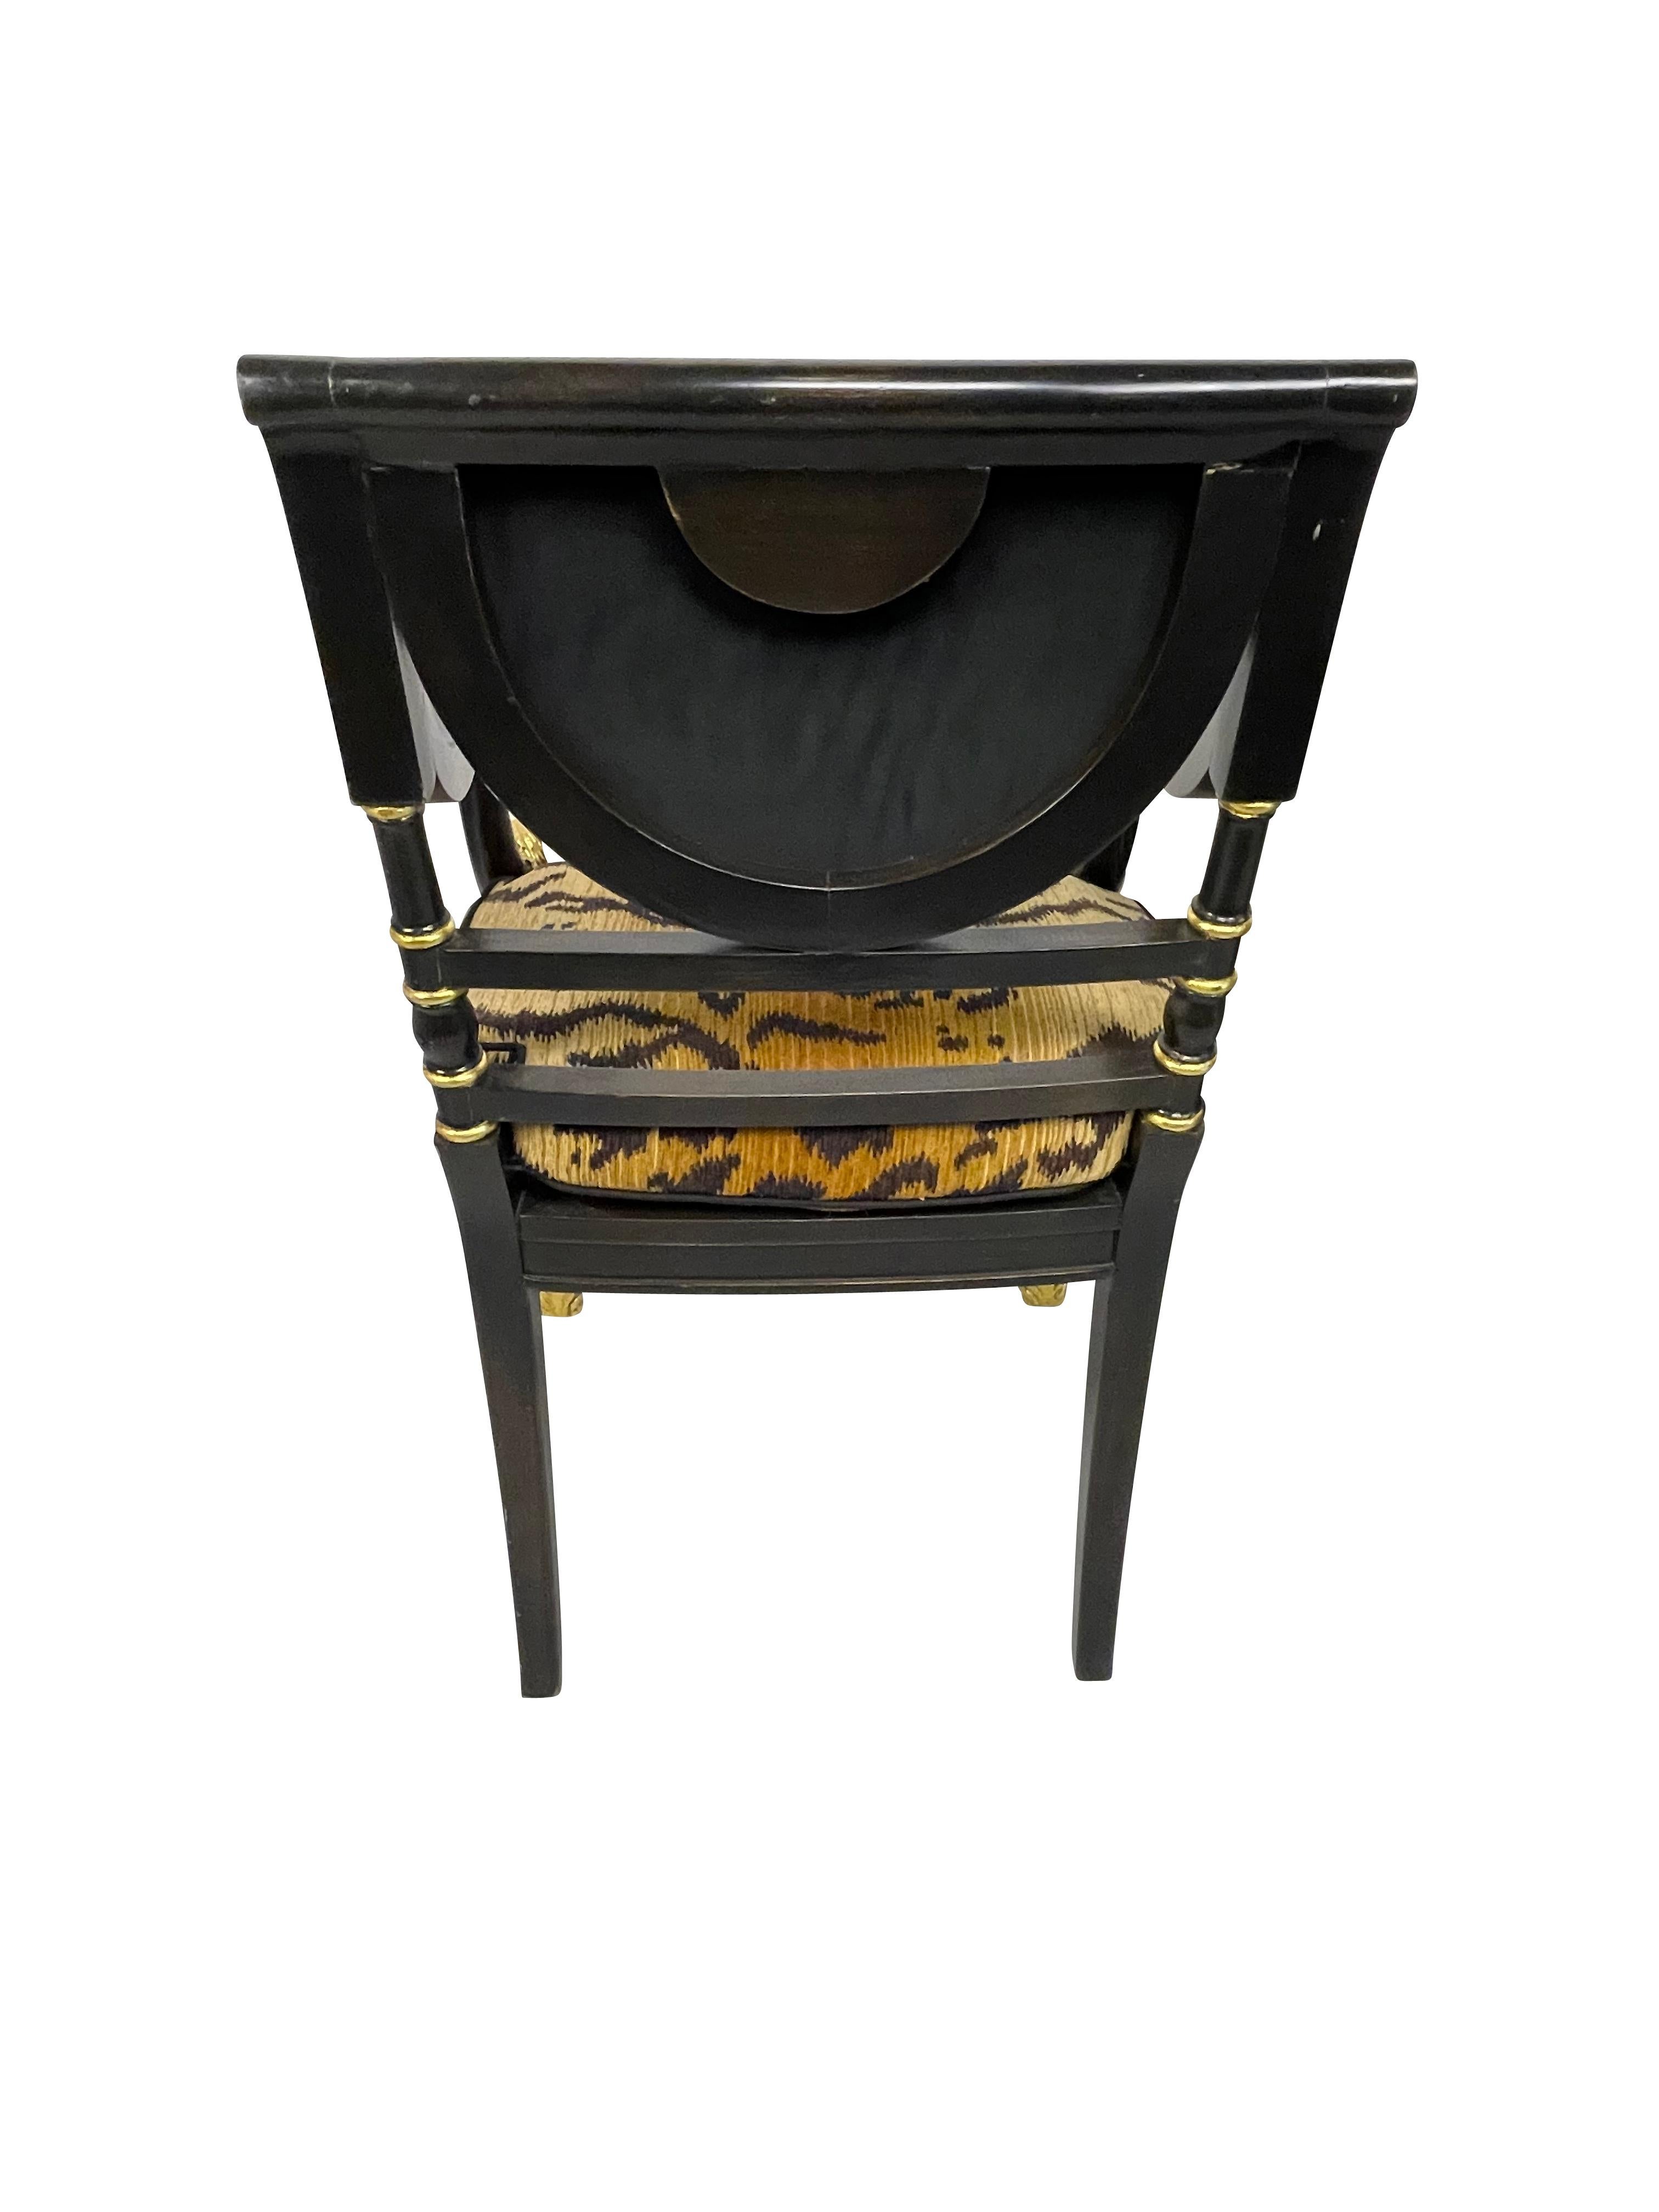 Regency Style Black Ebonized and Gilt Decorated Chairs with Animal Print Cushion 3